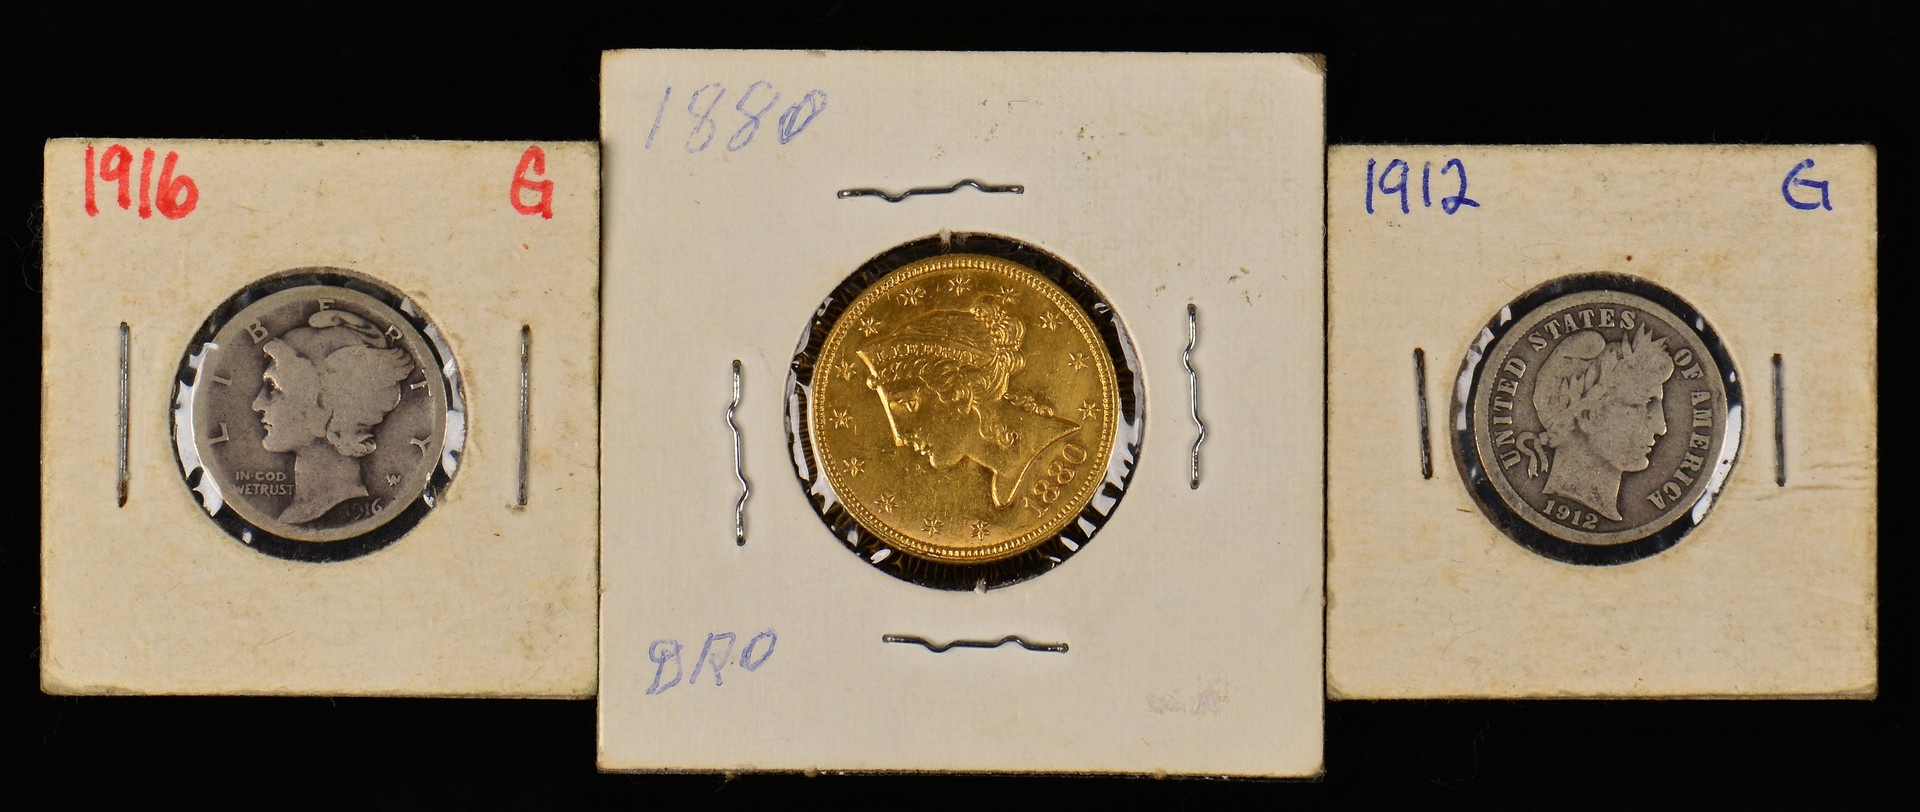 Lot 897: Group of 13 coins includ. gold